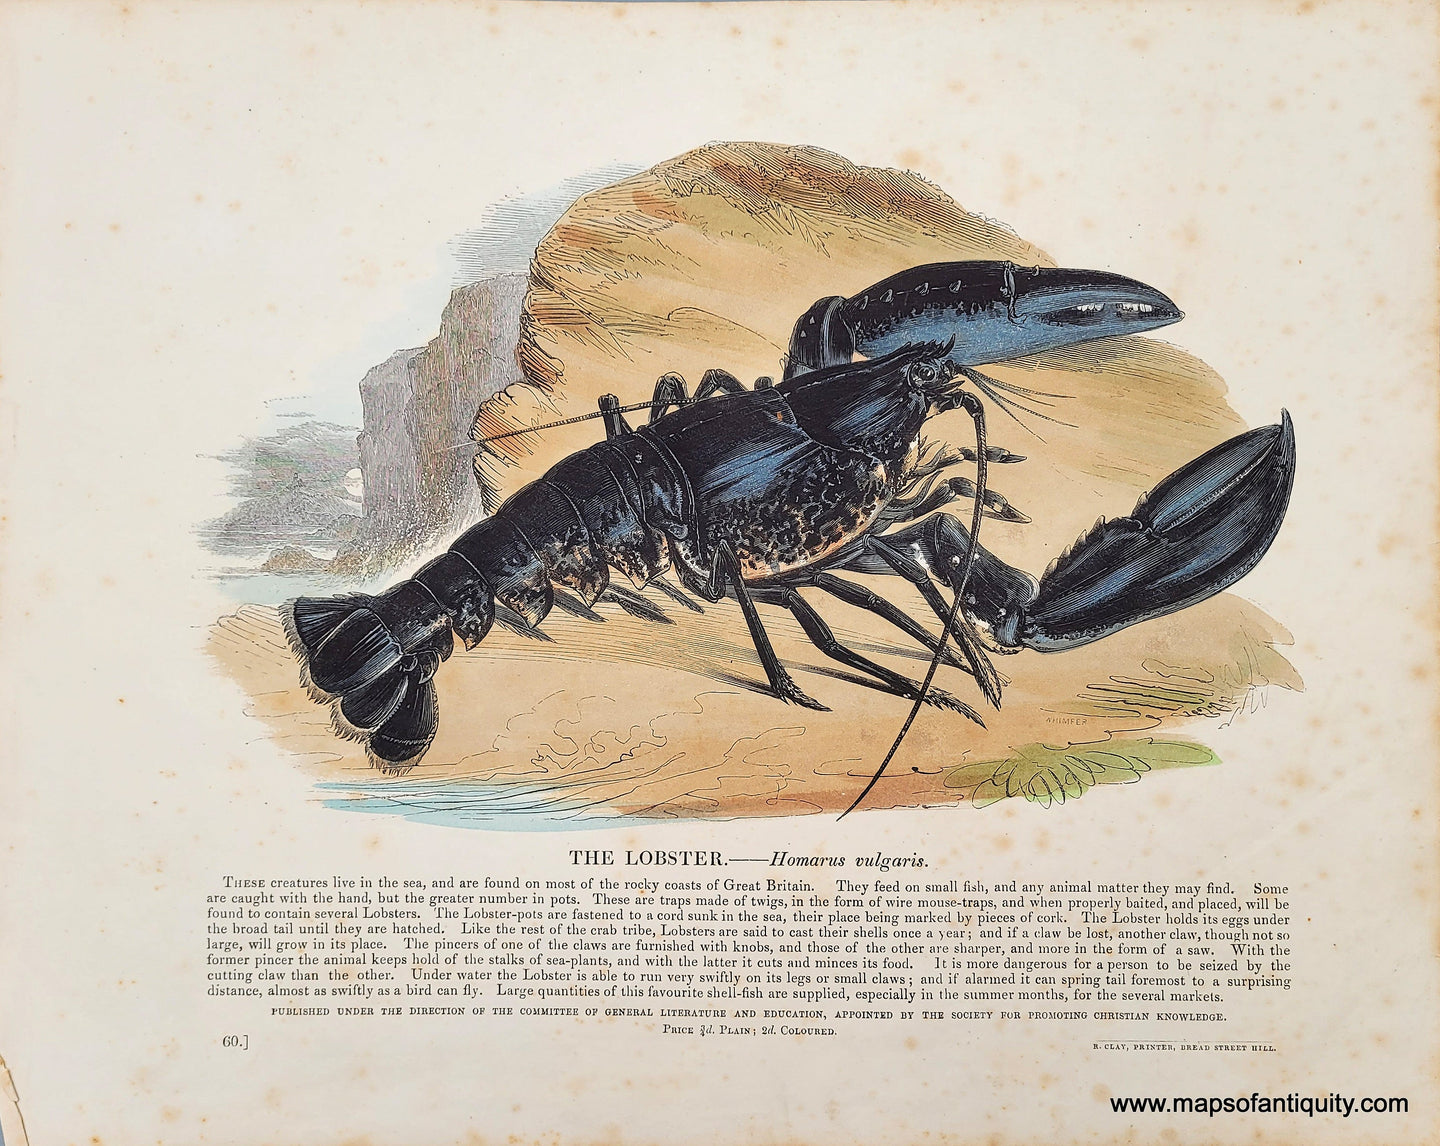 Genuine-Antique-Print-The-Lobster-1845-Whimper-Maps-Of-Antiquity